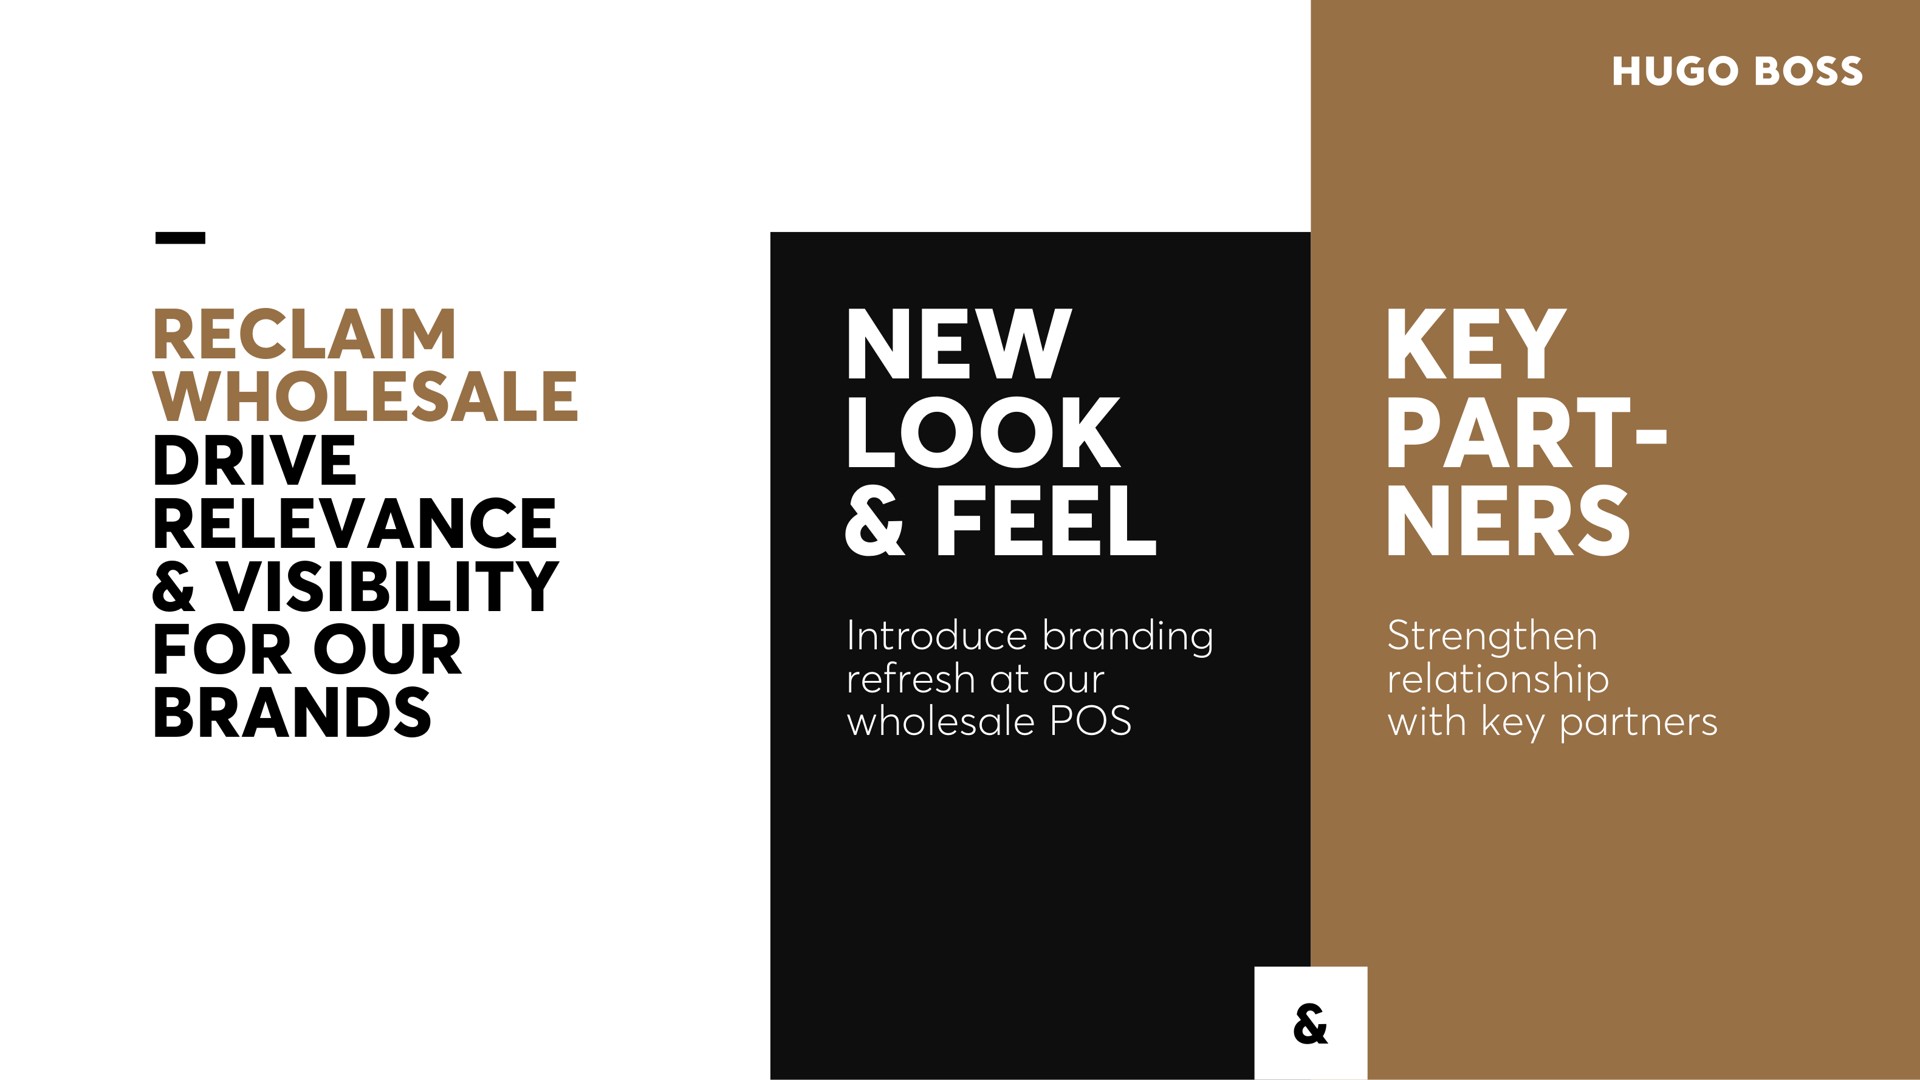 reclaim wholesale drive relevance visibility for our brands new look feel key part a | Hugo Boss